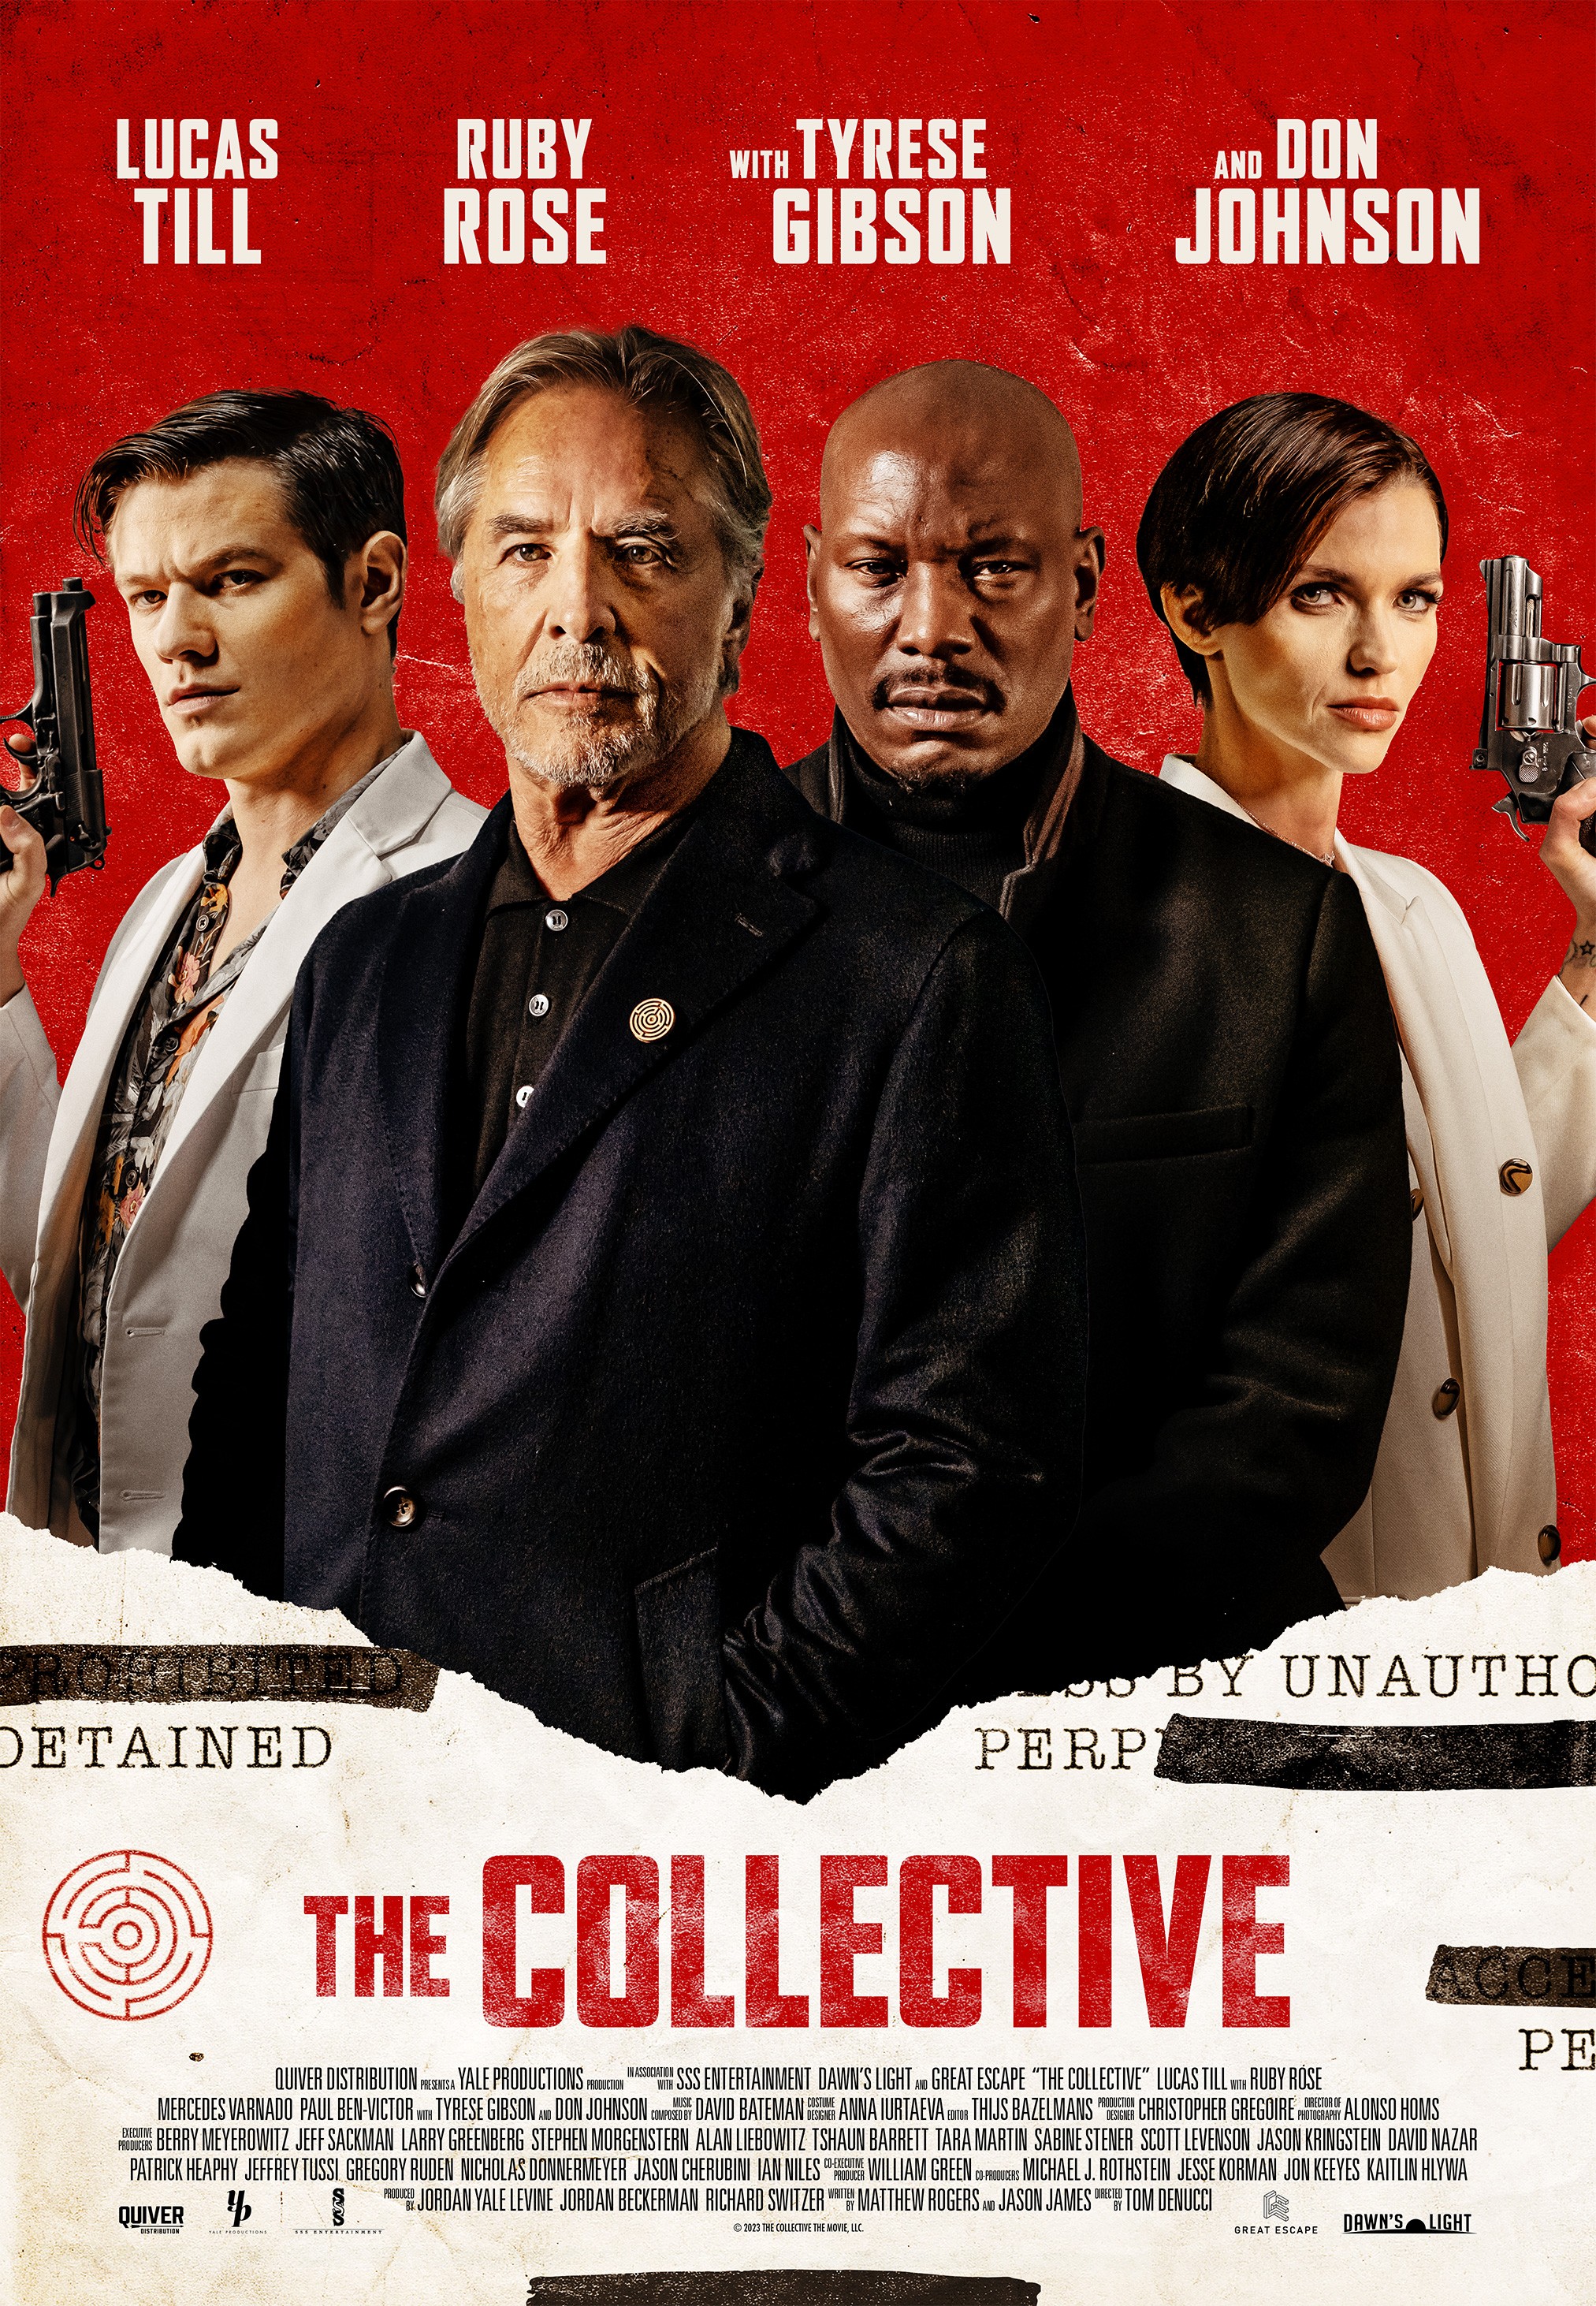 The Collective Review: A Muddled Blend of Action and Clichés